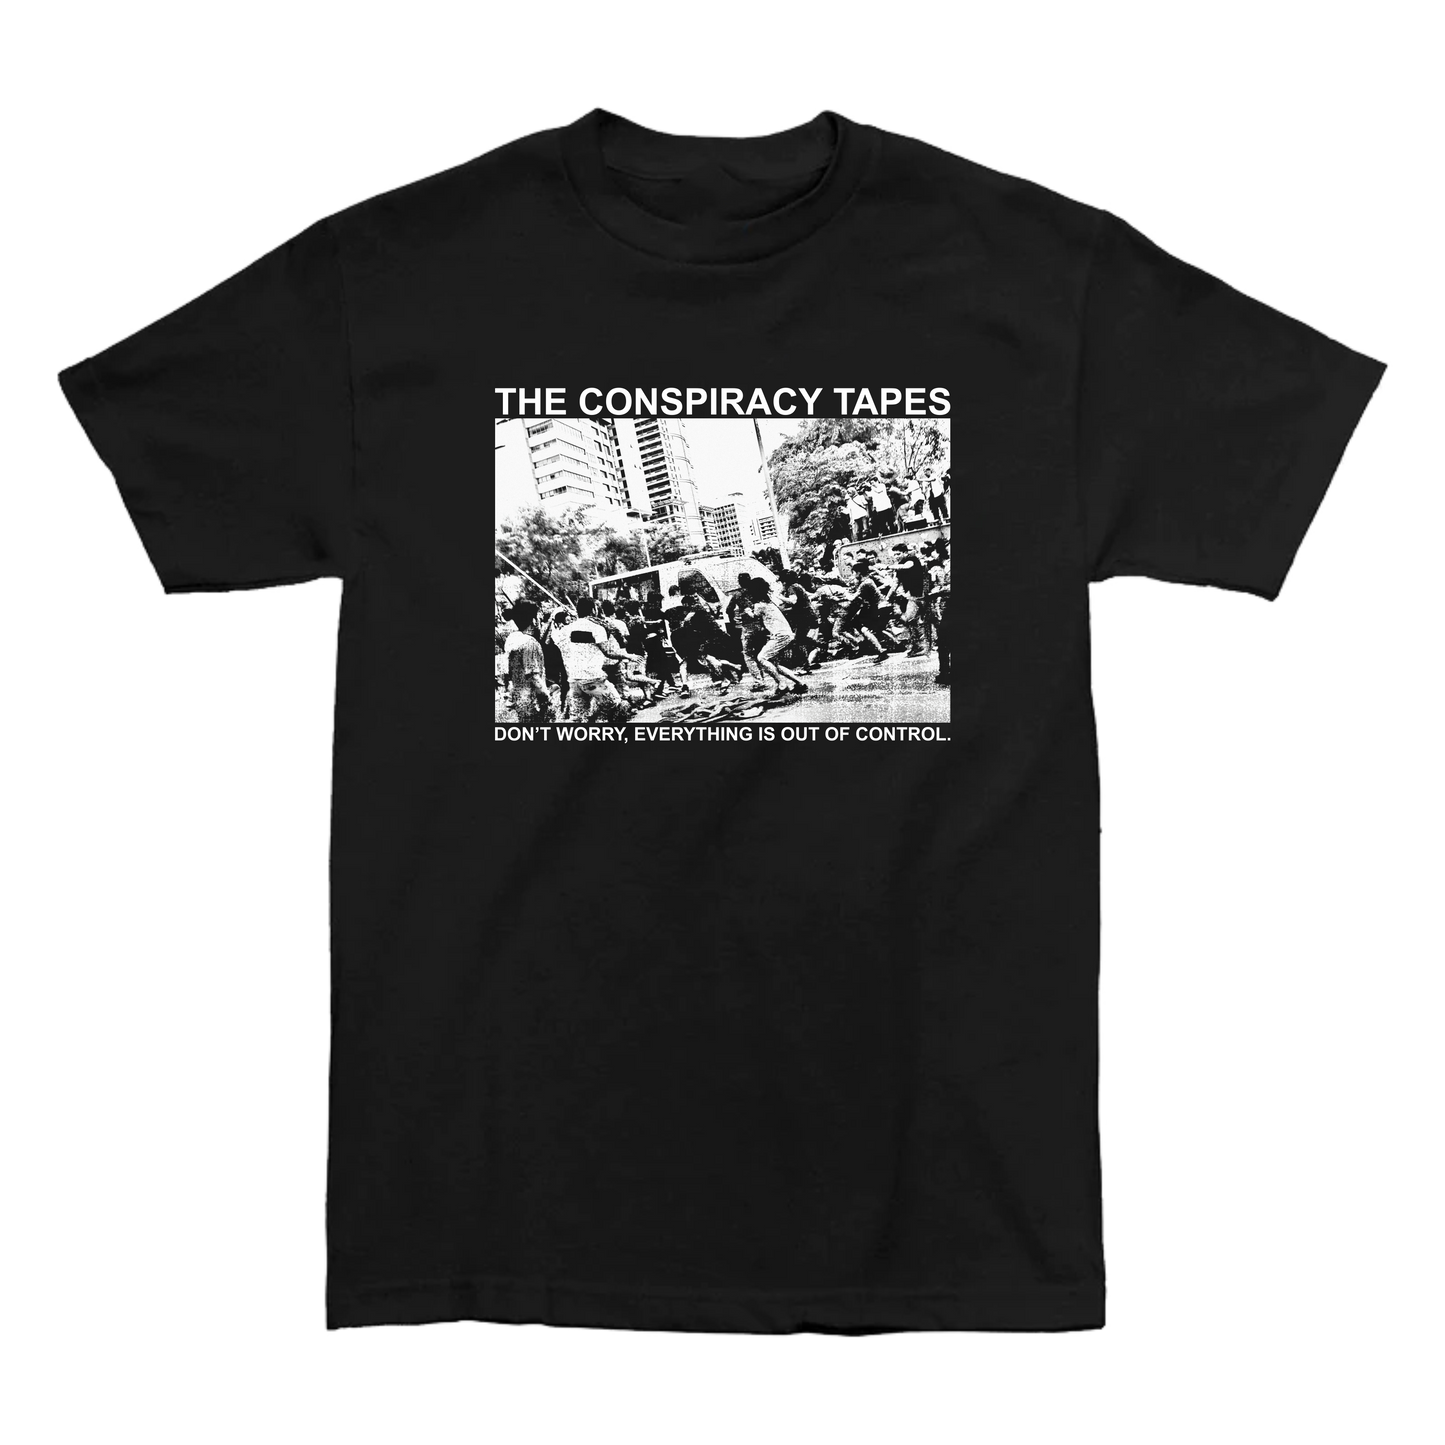 THE CONSPIRACY TAPES SHIRT